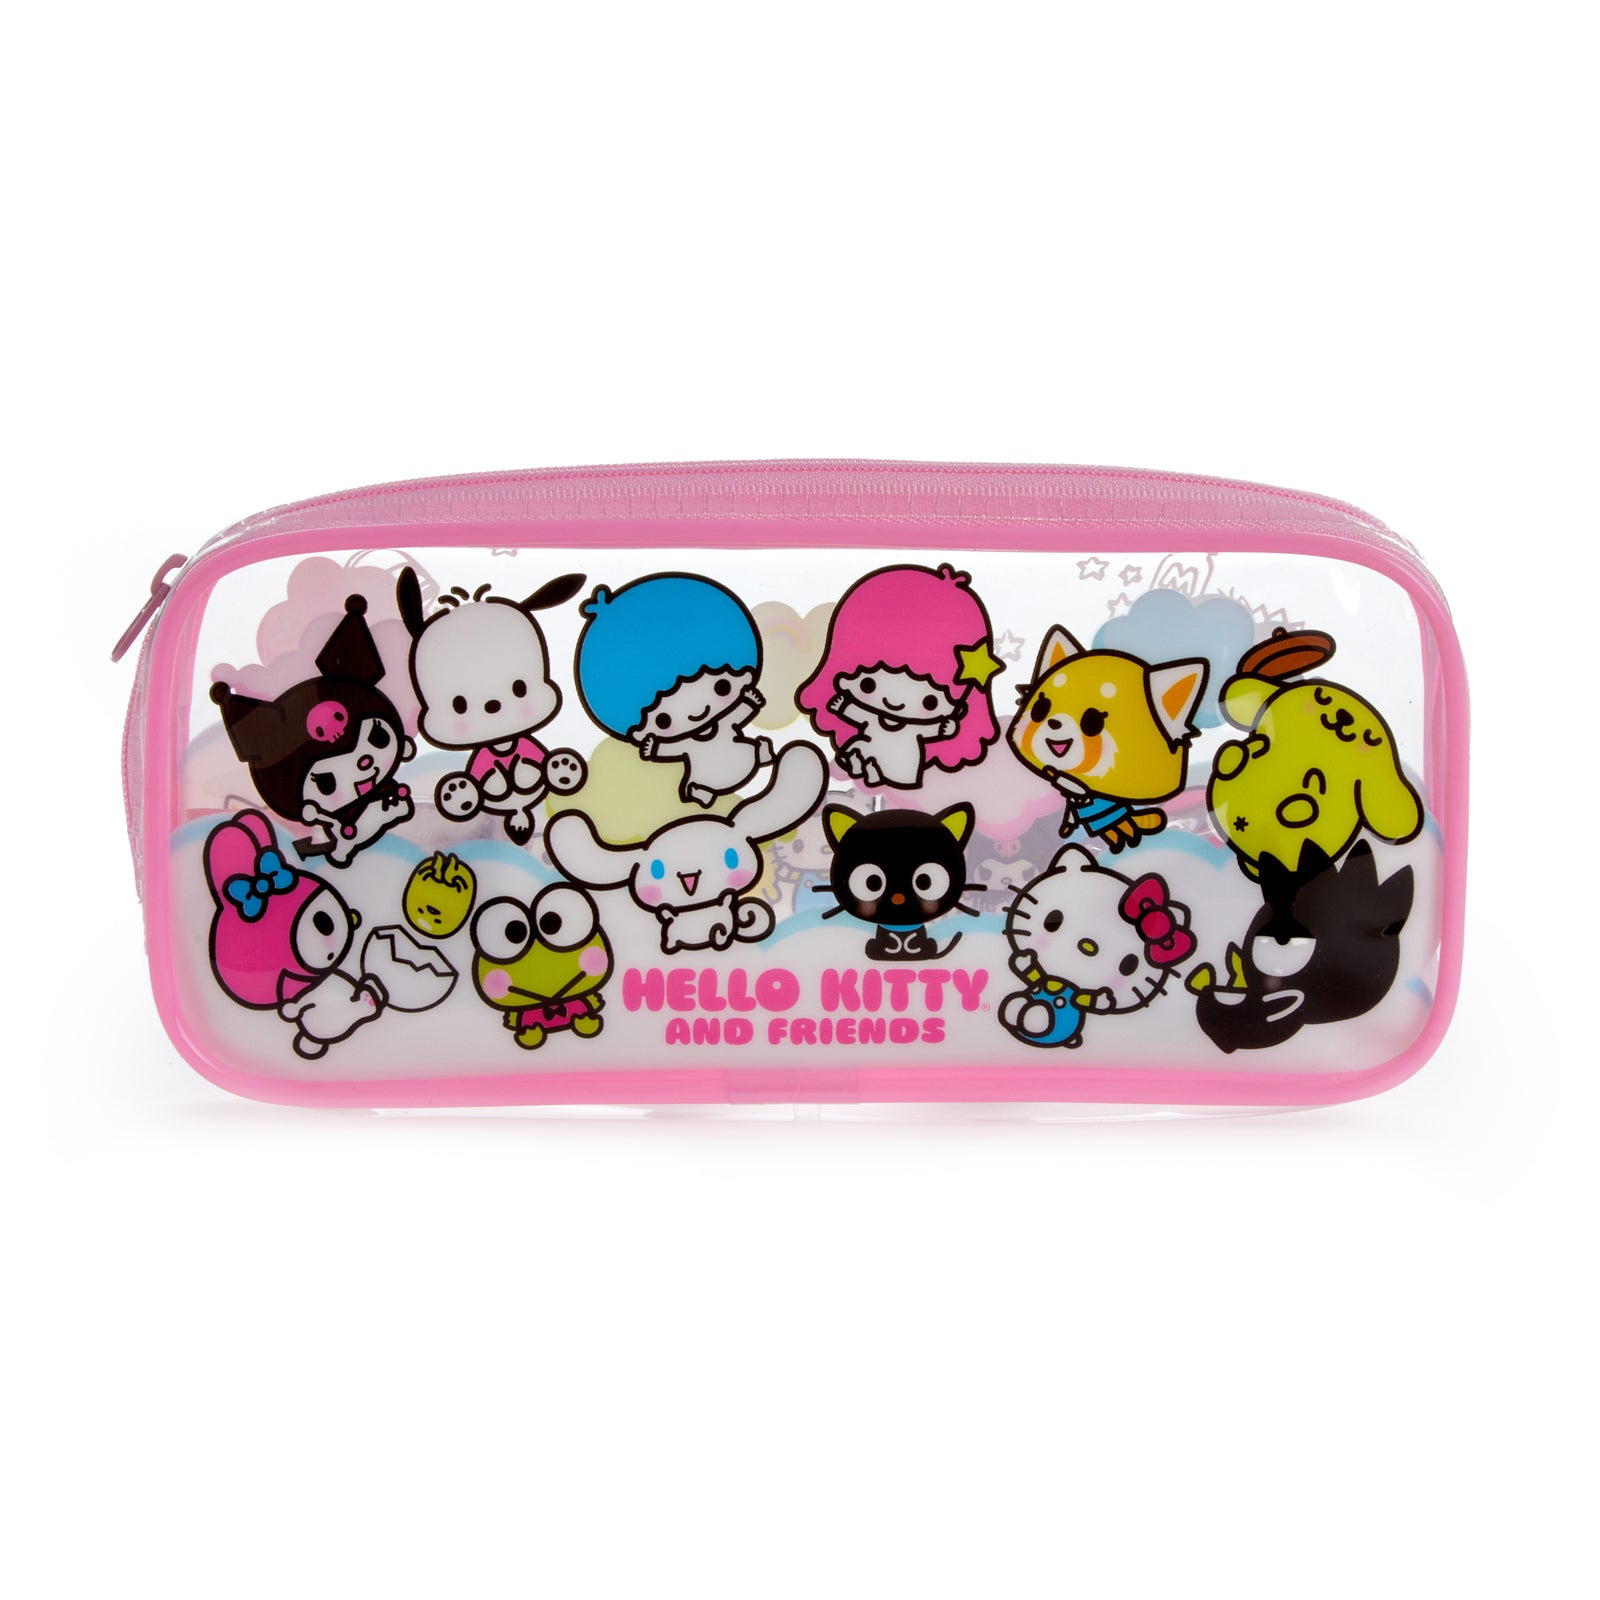 Sanrio Characters Constellation Pencil Pouch Pompompurin